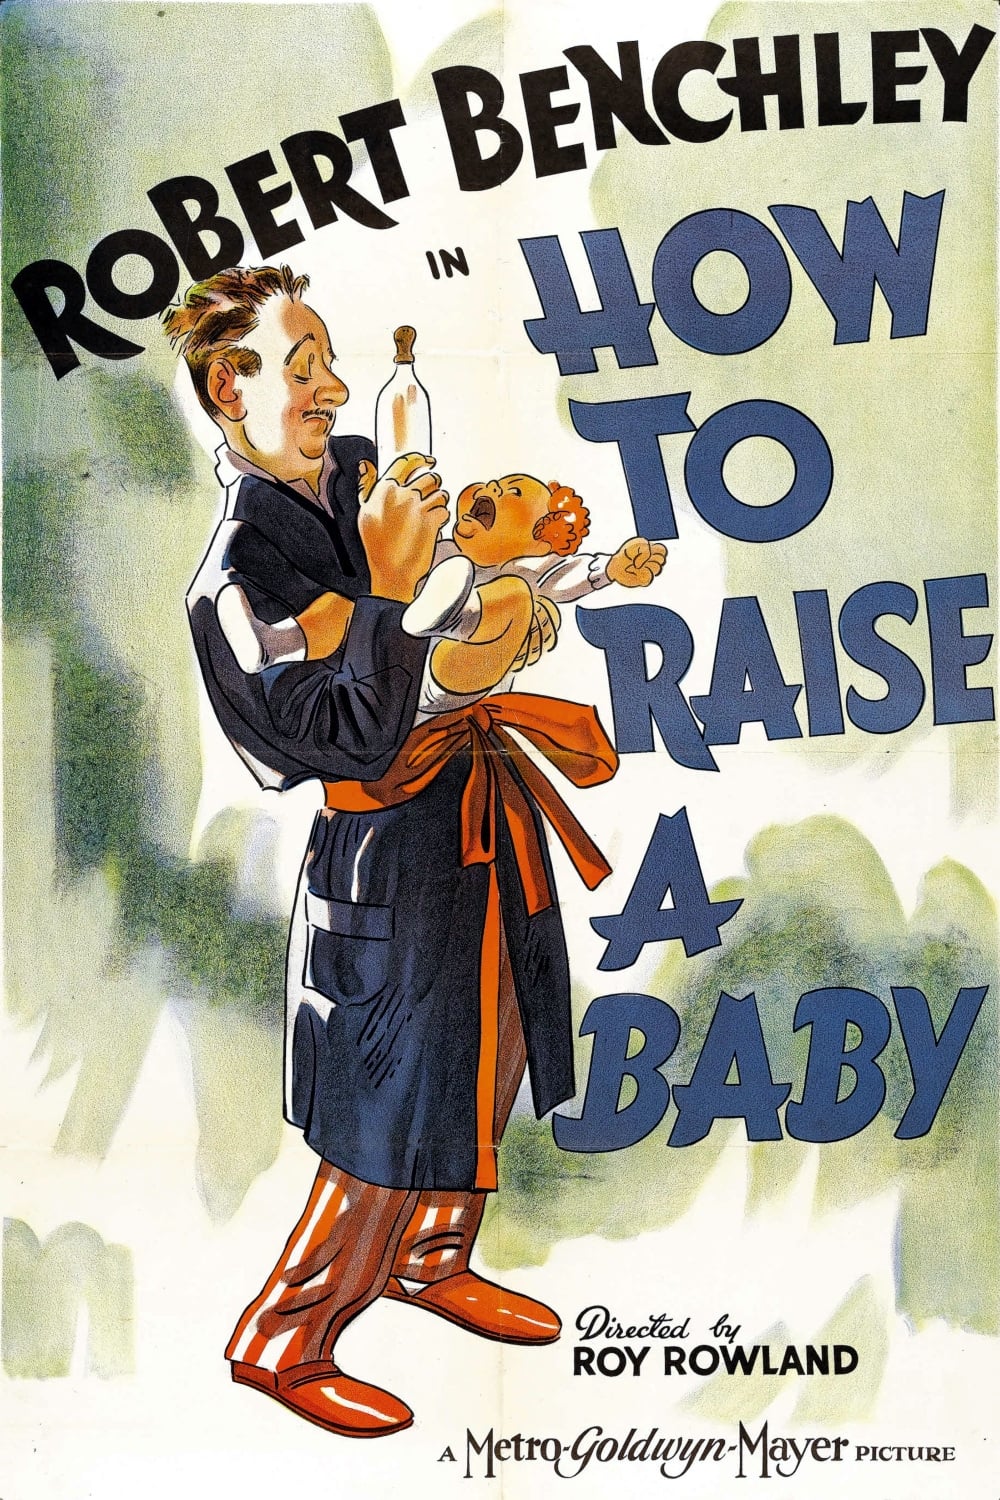 How to Raise a Baby